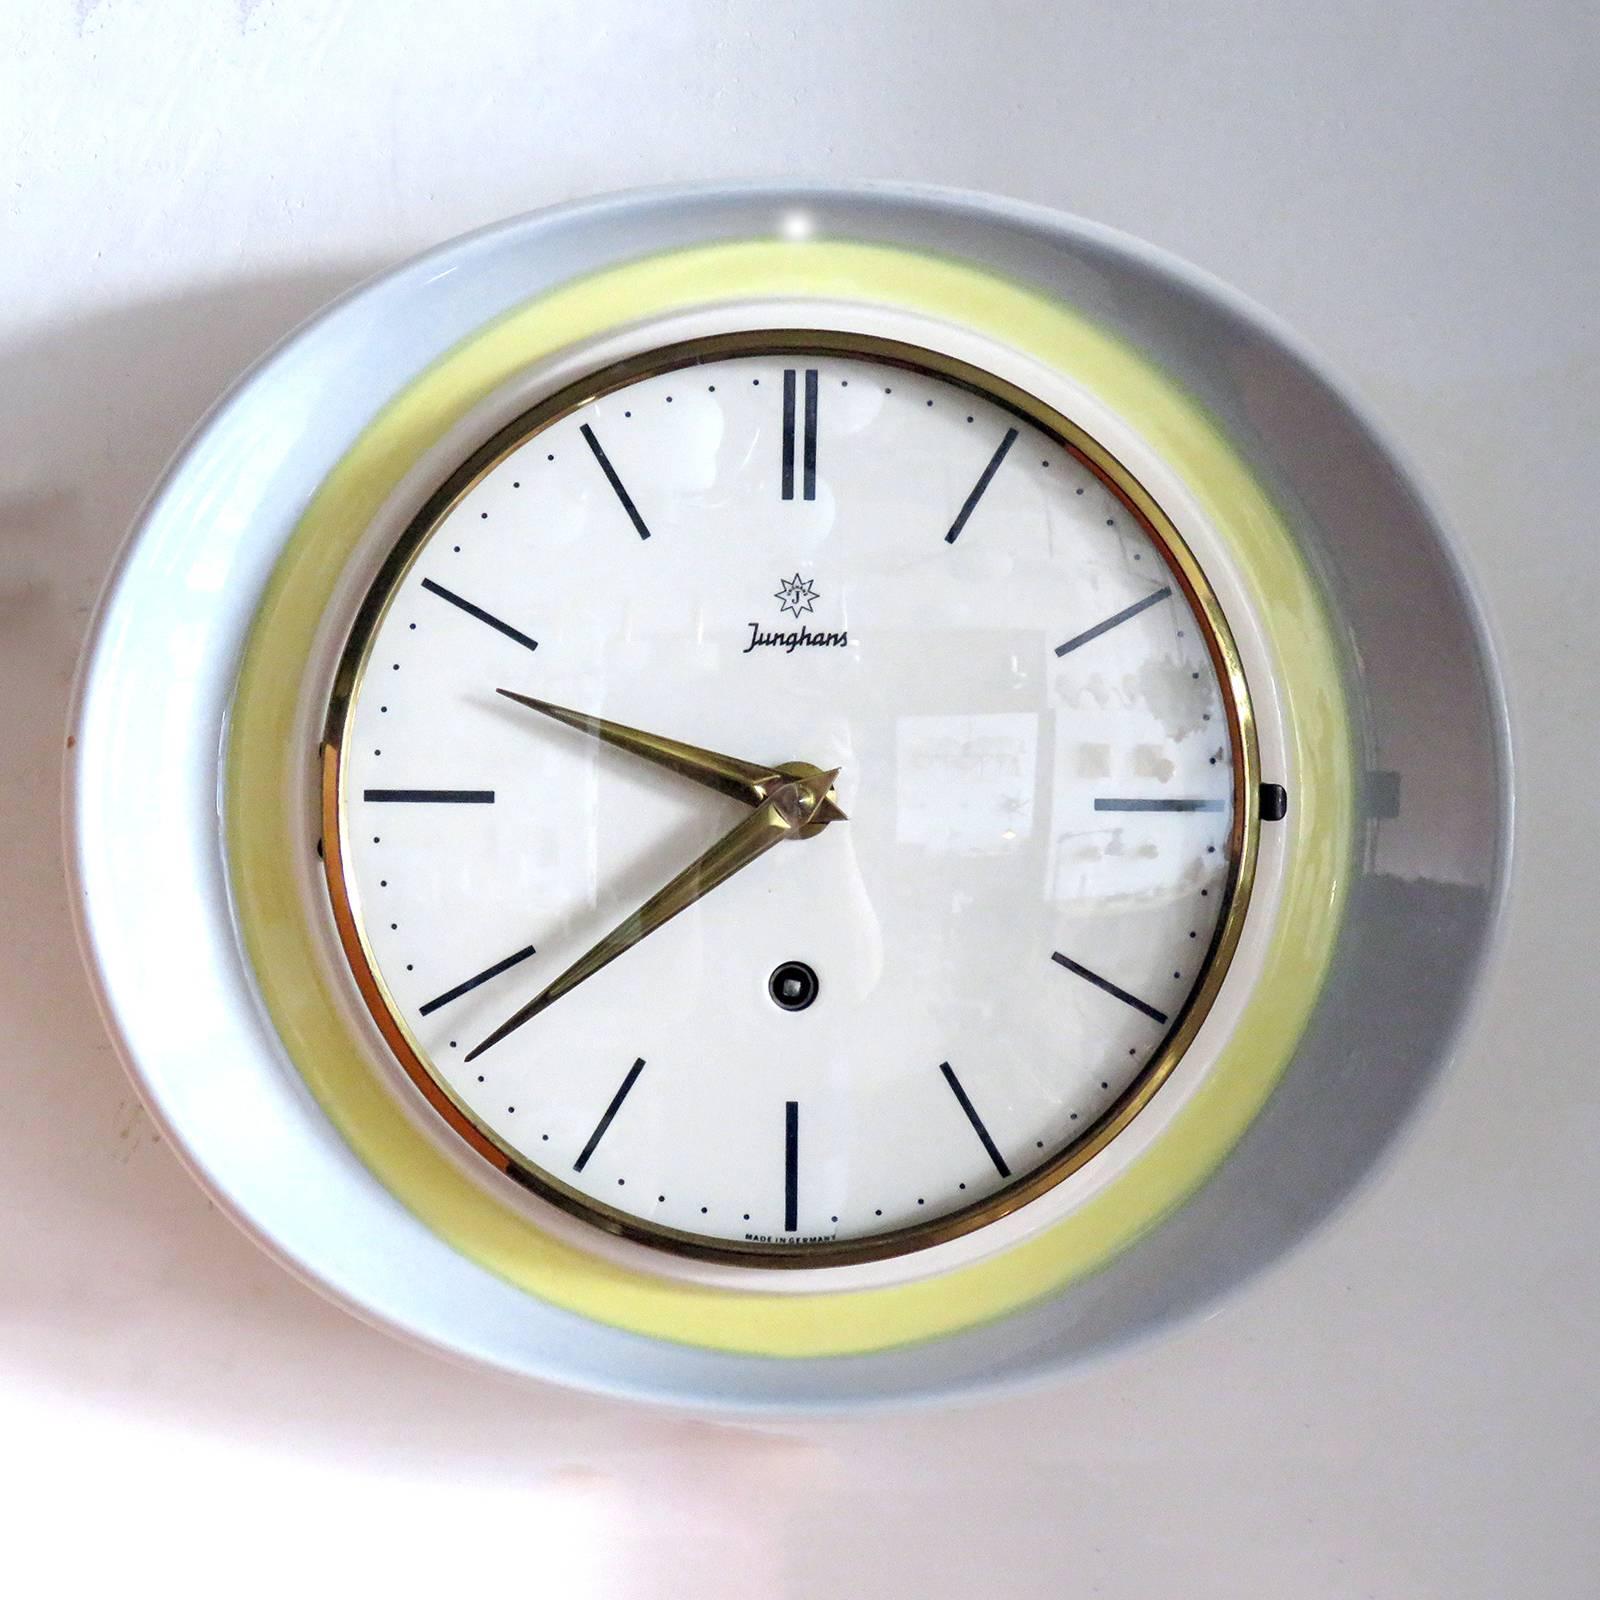 Rare, oval ceramic wall clock, attributed to Max Bill for Junghans Germany in the 1950s, with a Dual tone ceramic housing, powered by mechanical manual-winding clockwork, 3sec/24h, key present, marked.